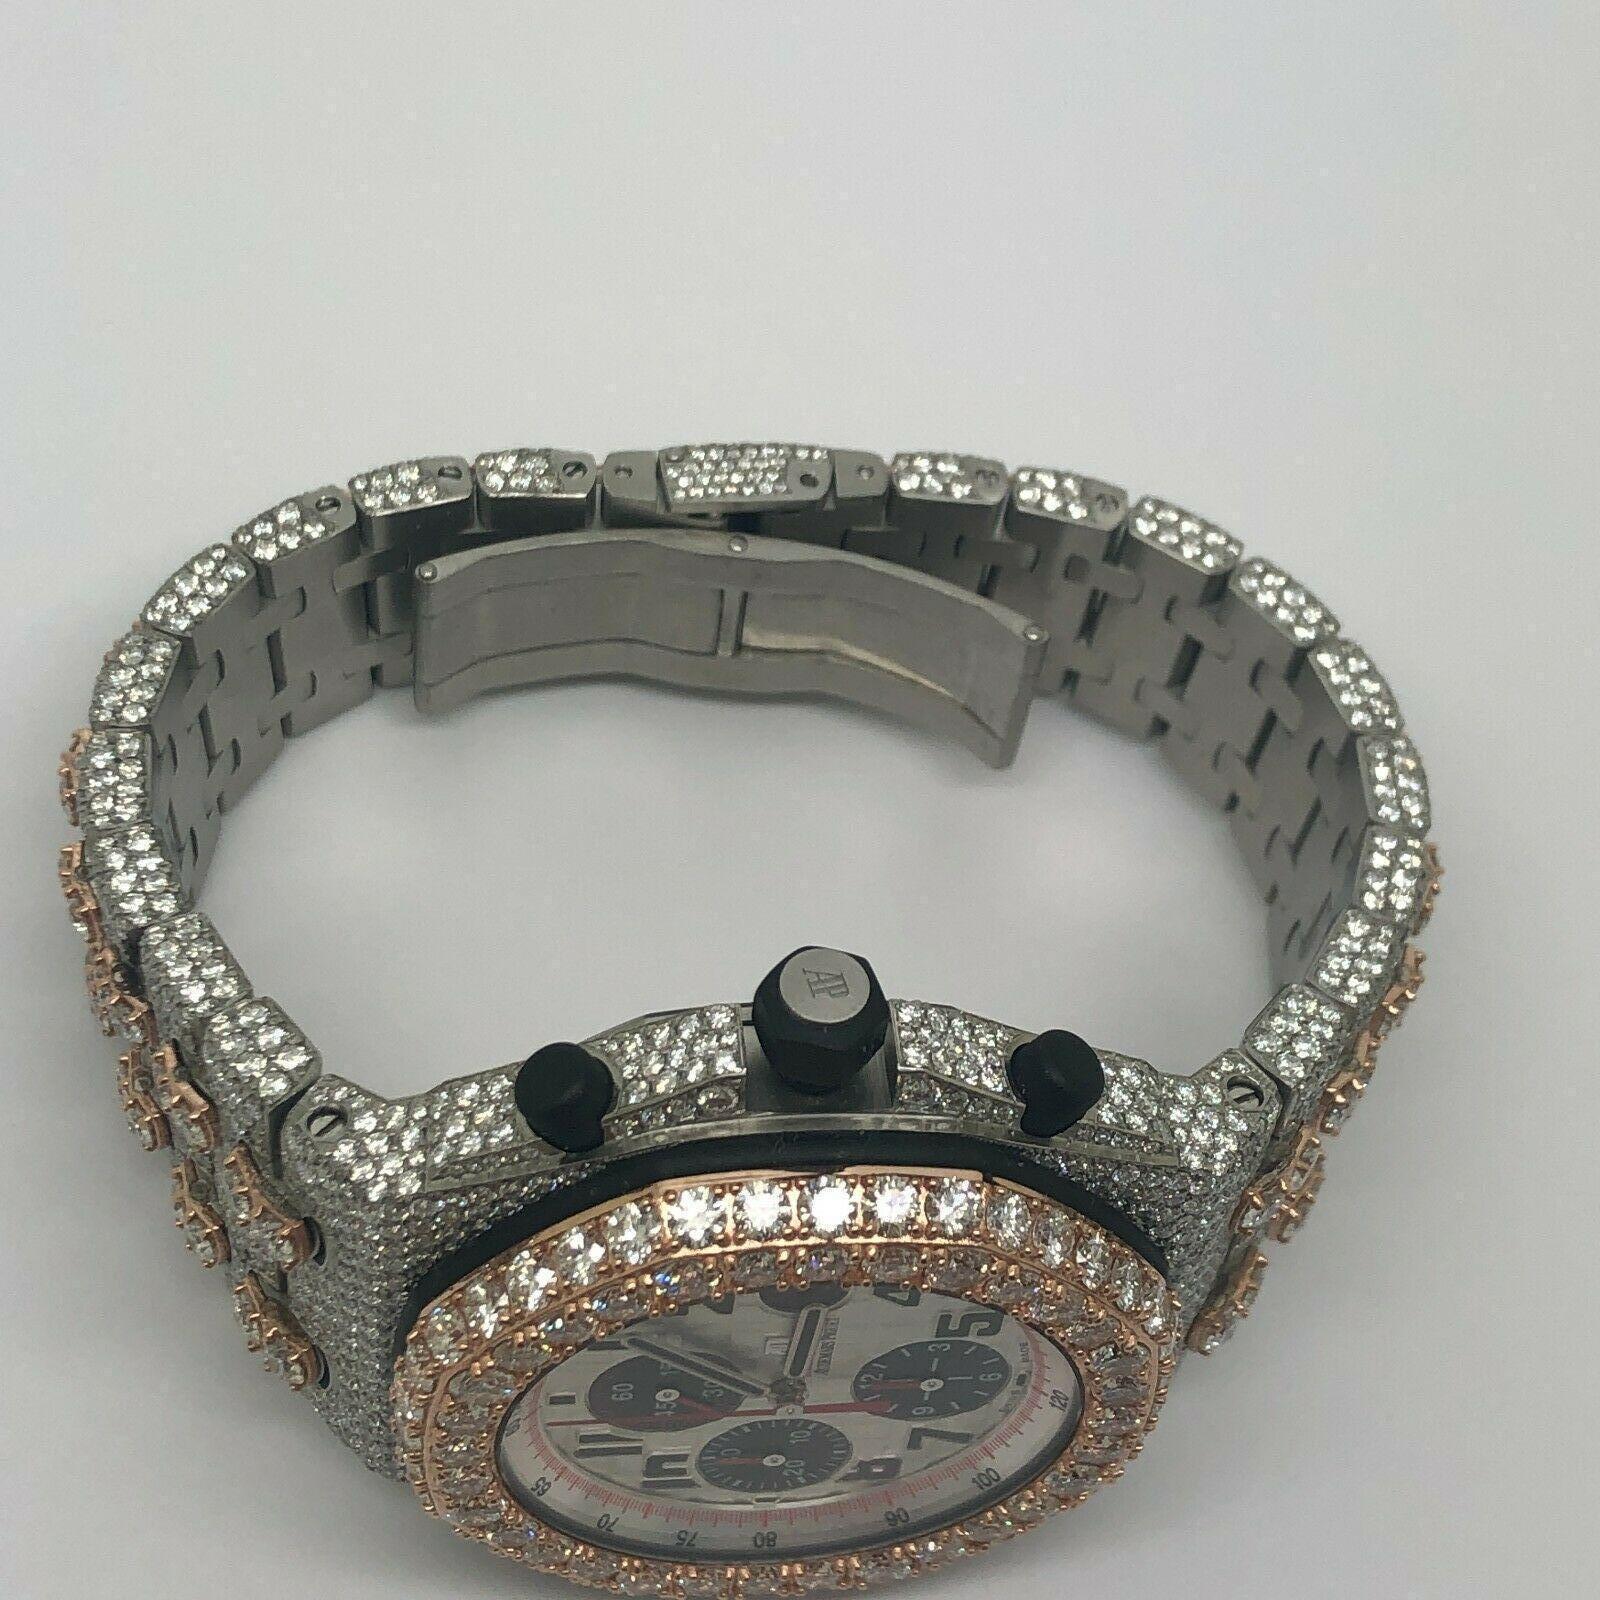 Audemars Piguet Offshore 18K Gold and Stainless Steel  Iced Out 45 Carats Diamonds

multi color Diamond Dial

excellent condition

vvs collection diamonds 45 carats

This watch is 100% all original Audemars Piguet comes with box and booklets

this